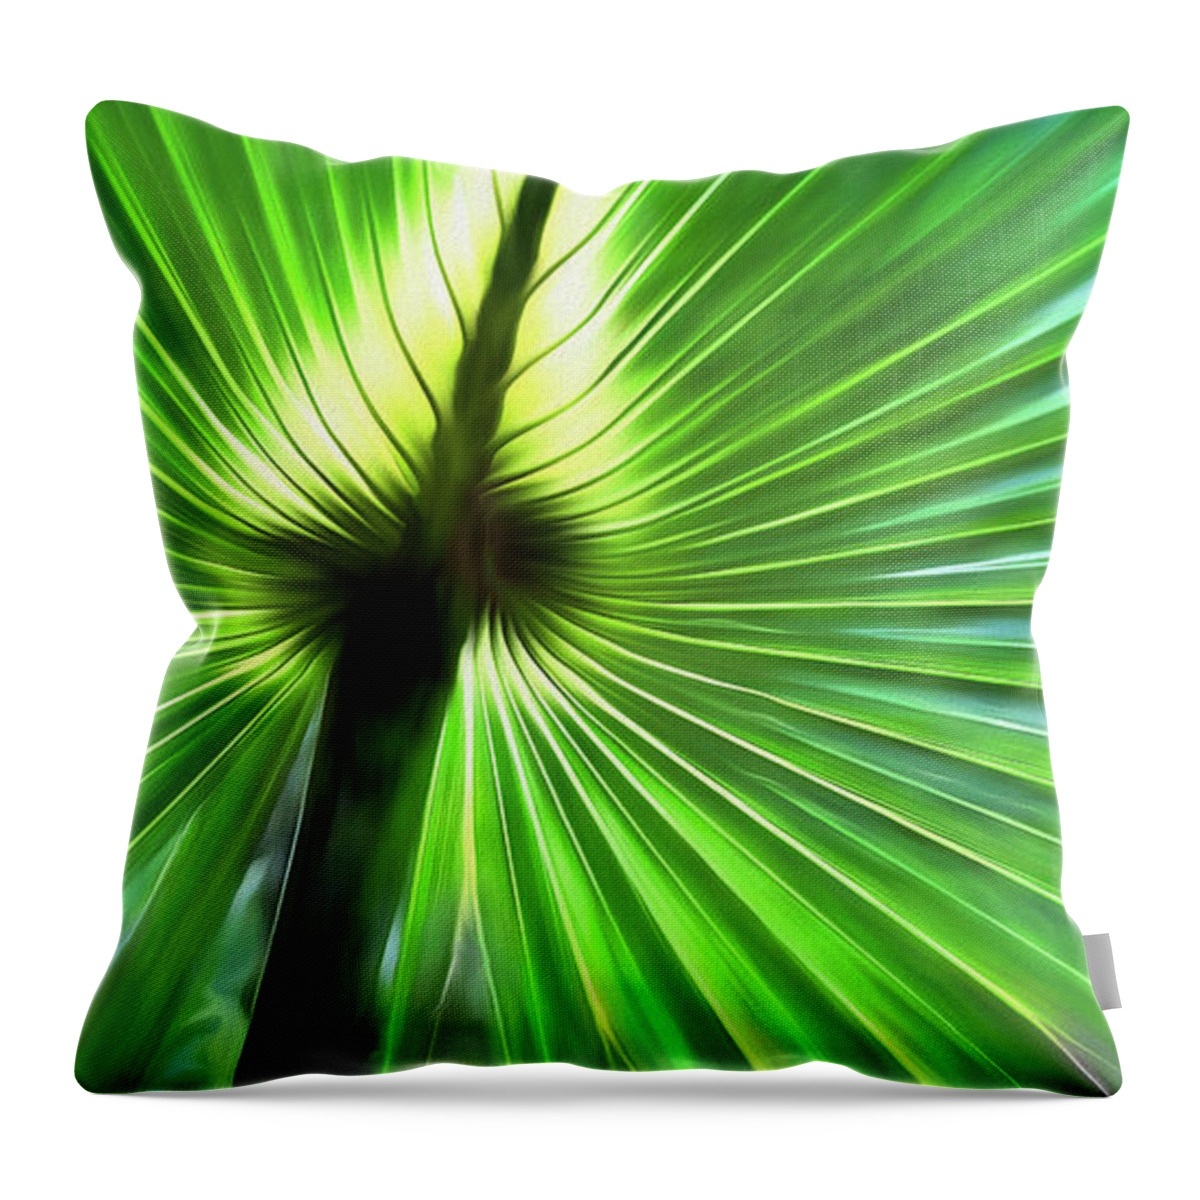 Plant Throw Pillow featuring the photograph Verdant Glow by Art Cole